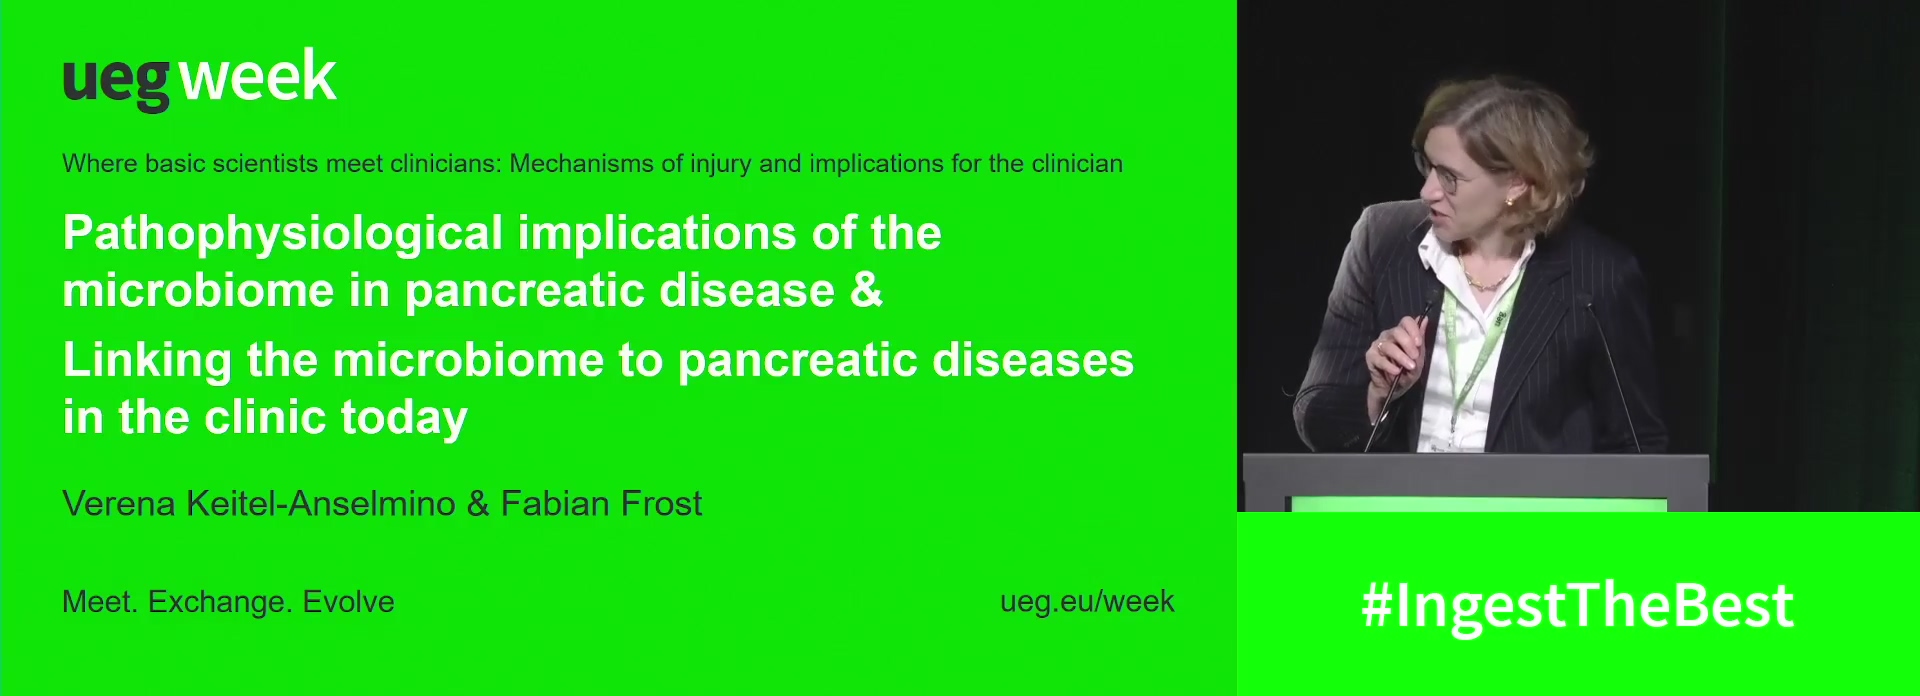 Pathophysiological implications of the microbiome in pancreatic disease / Linking the microbiome to pancreatic diseases in the clinic today